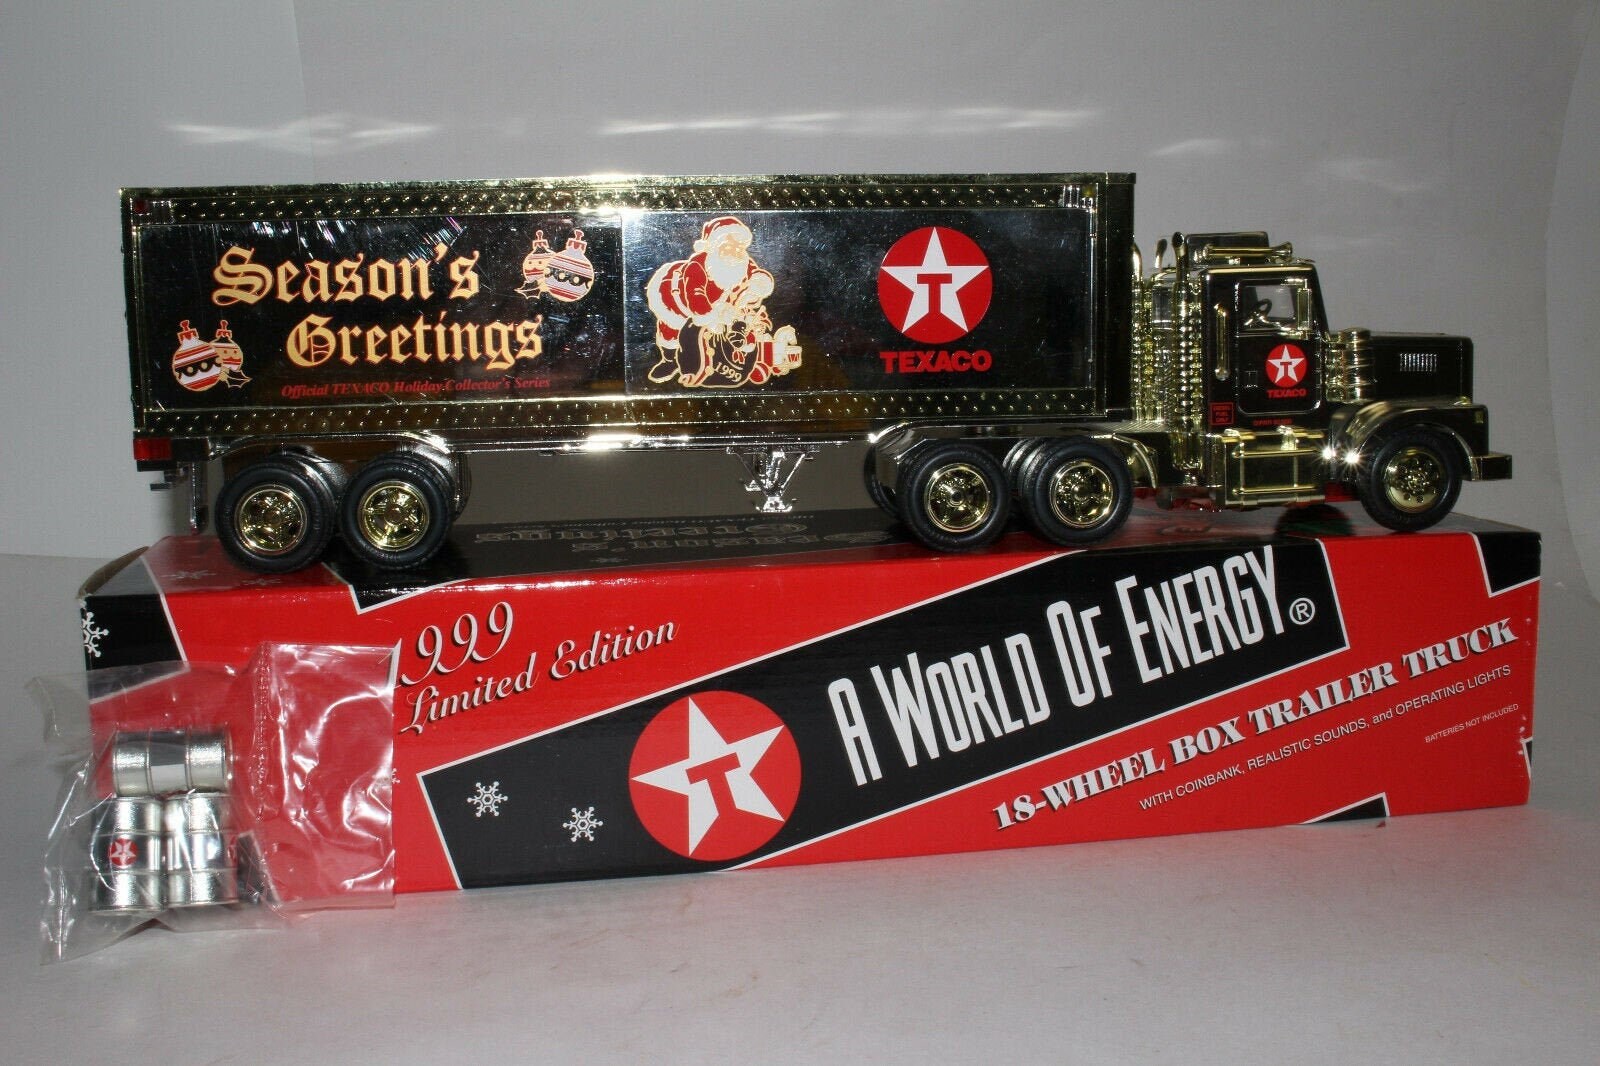 1999 Texaco Holiday Box Trailer Truck Coinbank Limited Edition Collectors Series 